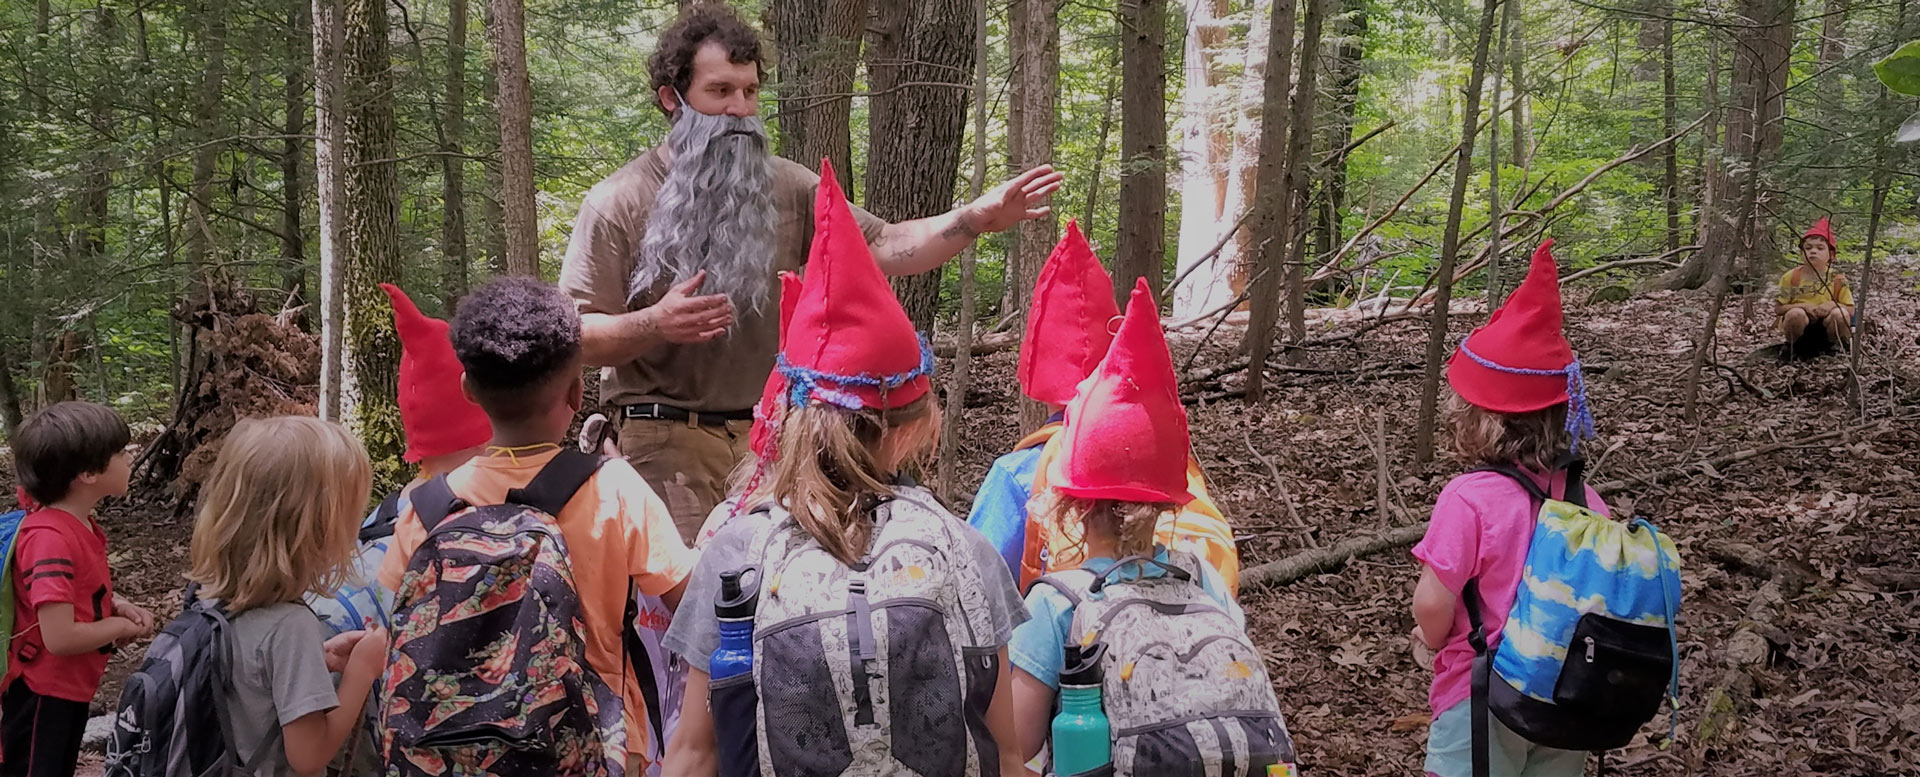 Children in fun hats at Asheville homeschool program in the forest role playing as faeries